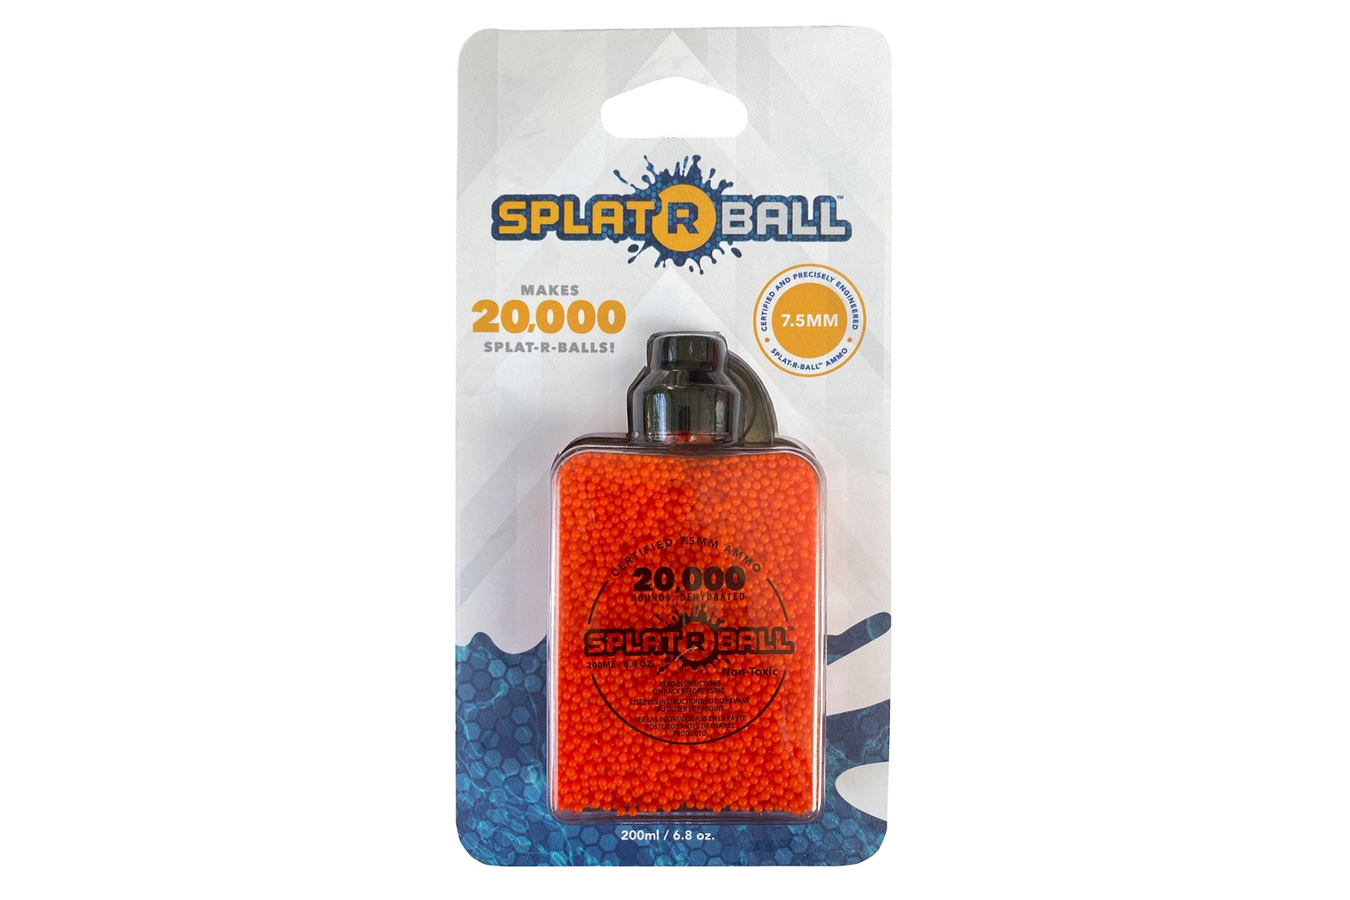 SPLAT R BALL WATER BEAD AMMO (20,000 COUNT)